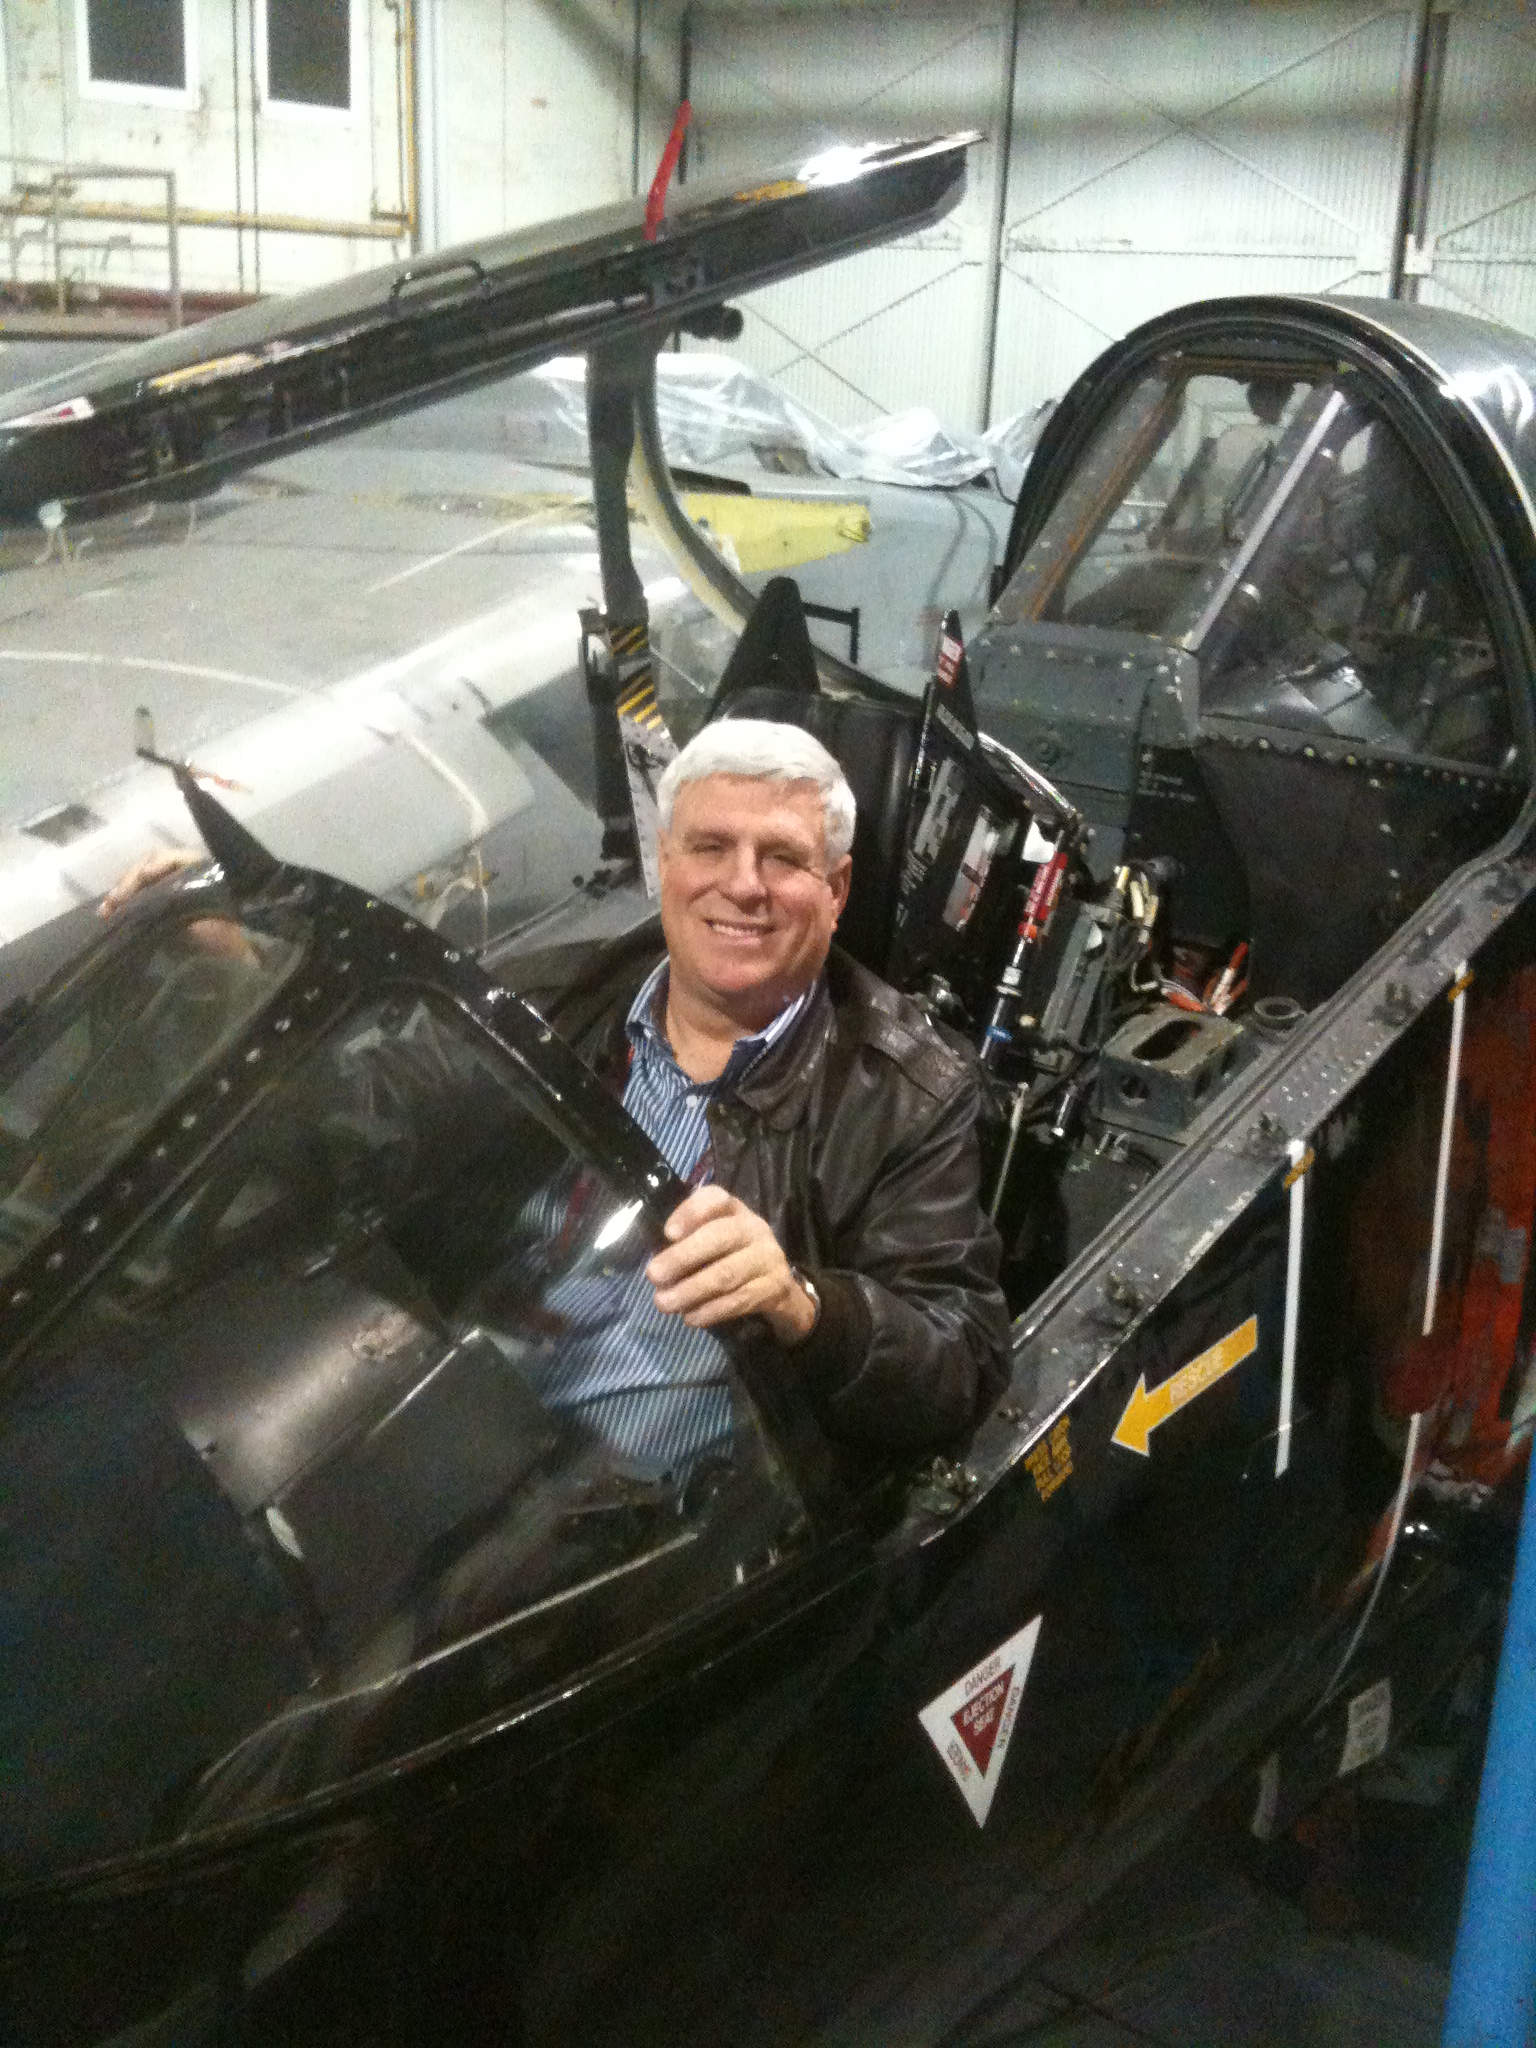 Art Nalls in the cockpit of his newly acquired Harrier. (photo via Art Nalls)